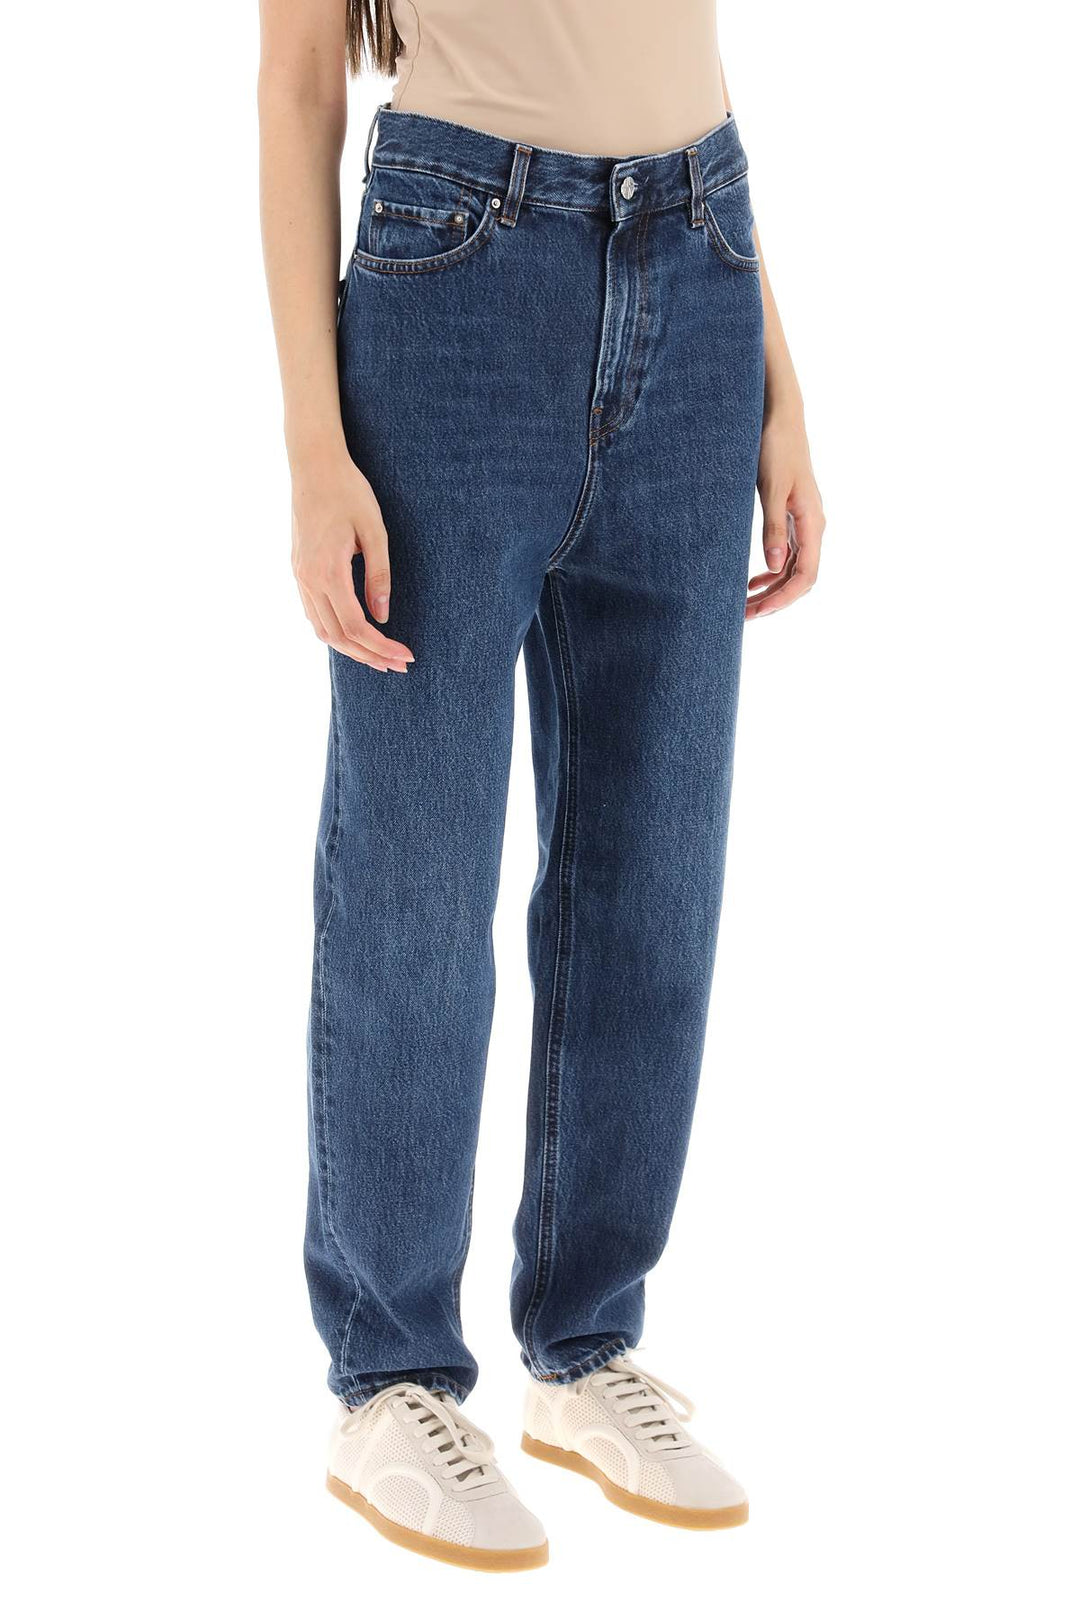 Toteme Tapered Jeans   Blue